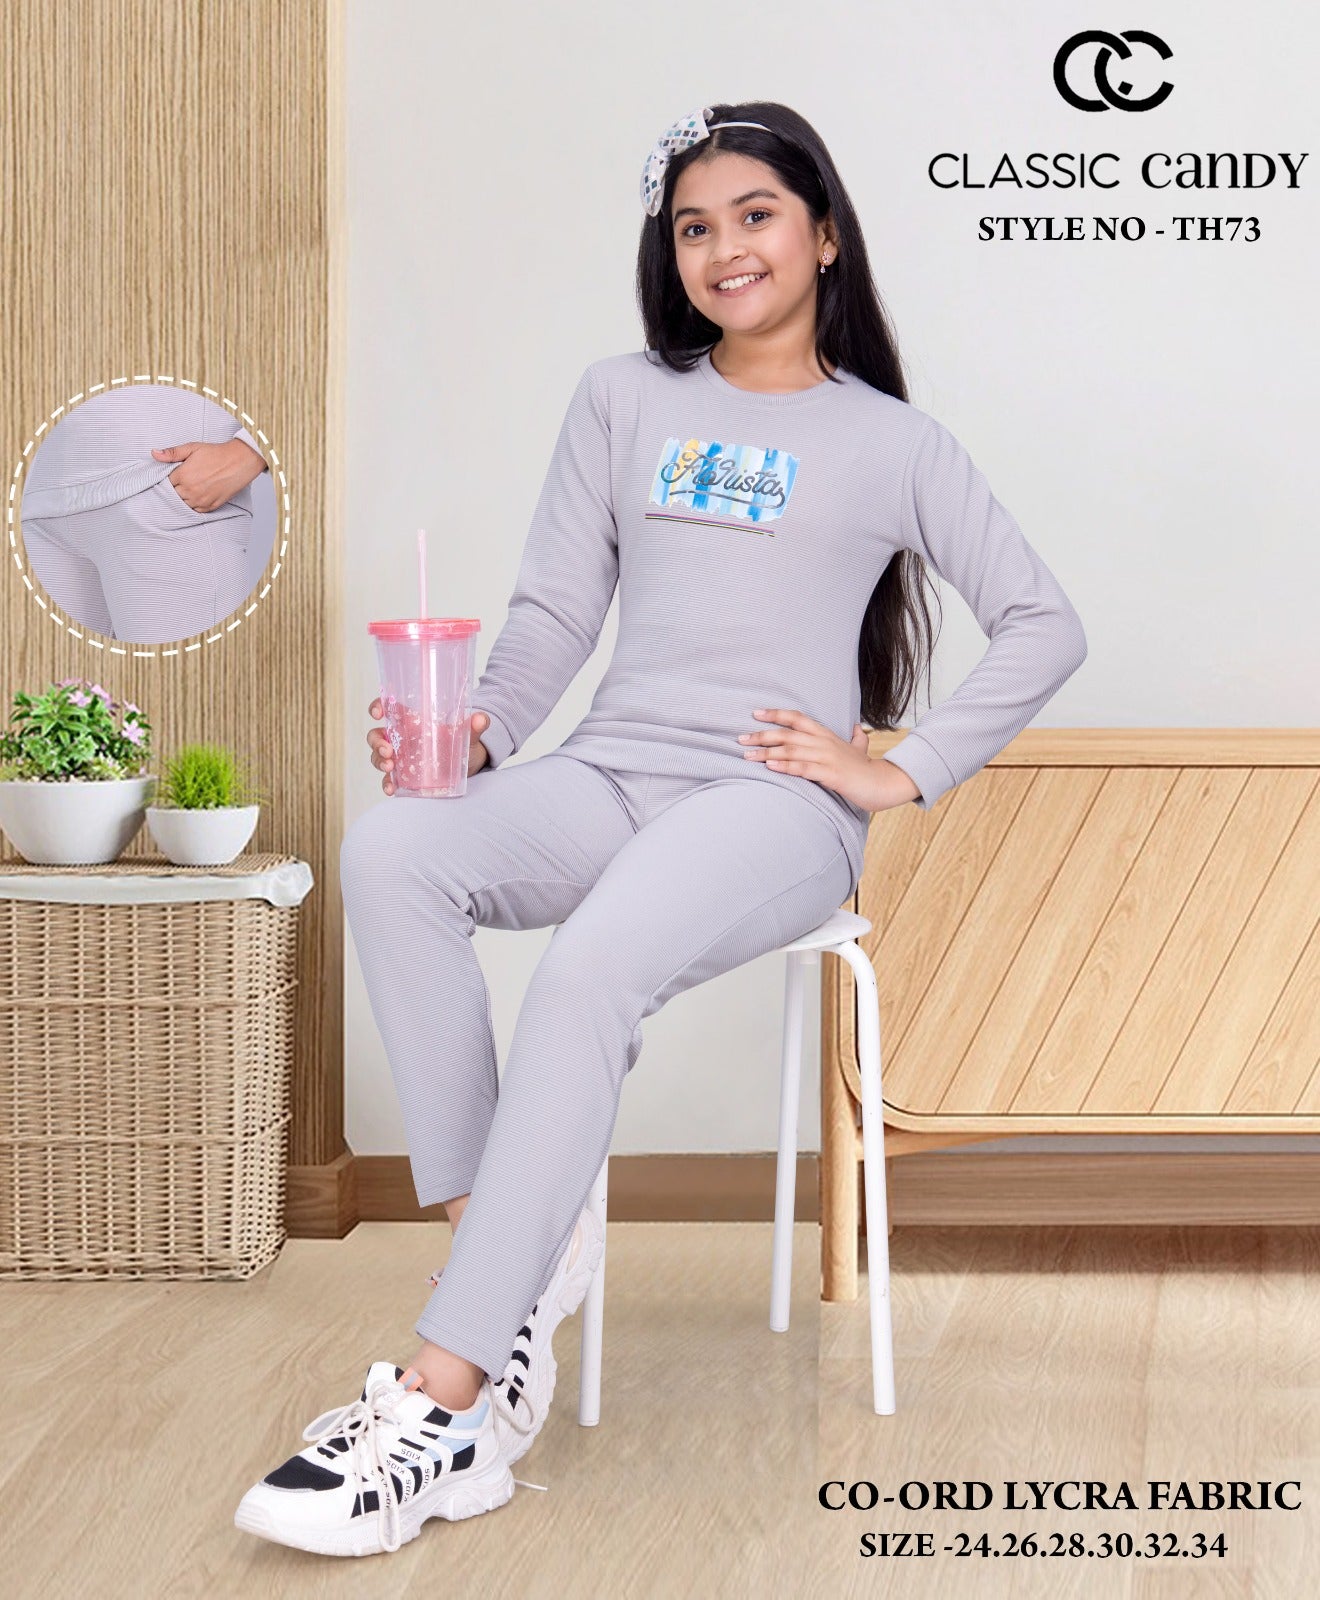 Th 73 Classic Candy Lycra Girls Co Ord Set